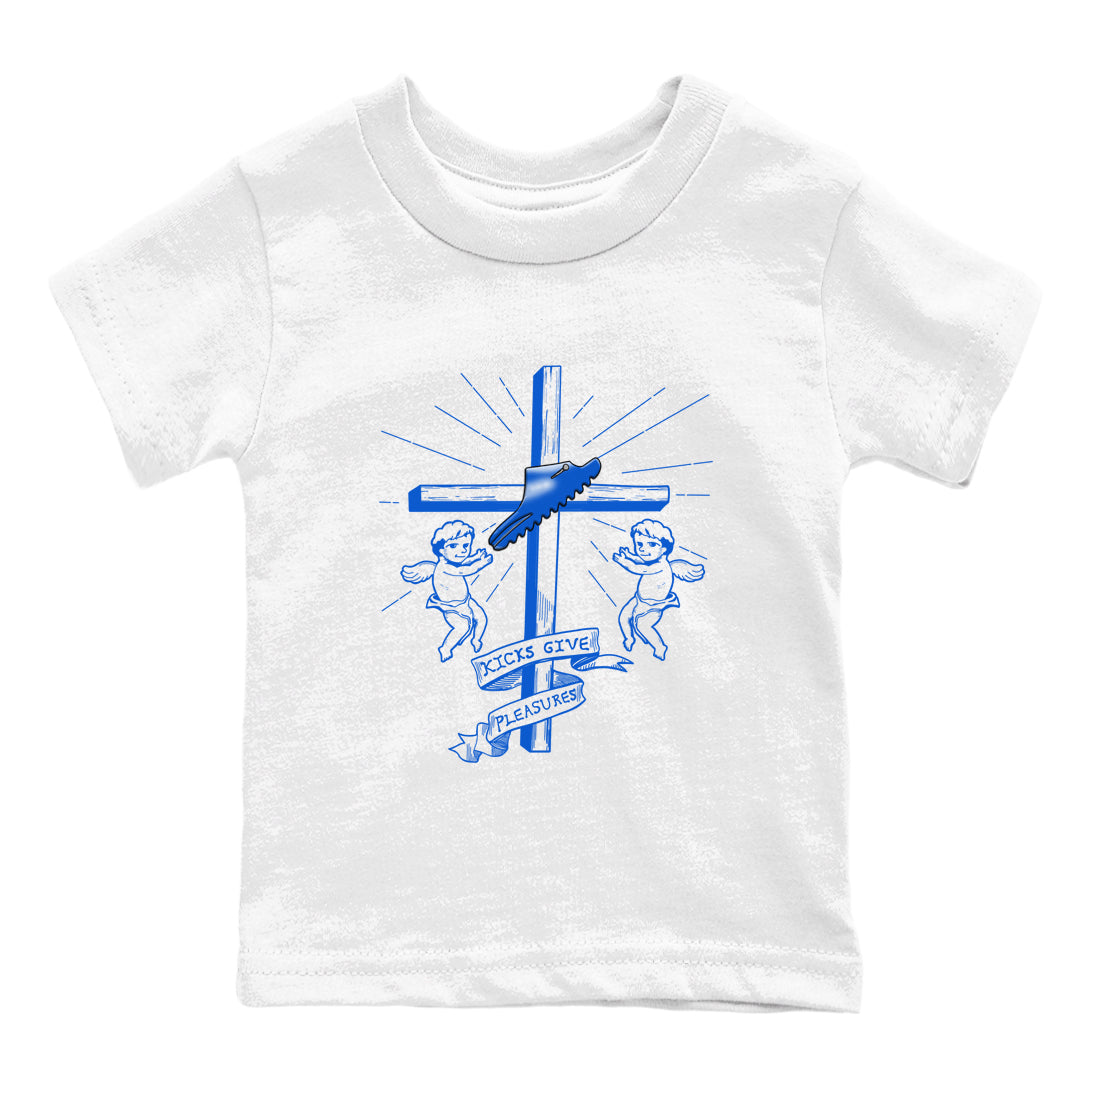 Yeezy Slide Azure shirts to match jordans Kicks Give You Pleasures sneaker match tees Yeezy Slide Azure SNRT Sneaker Tees streetwear brand Baby and Youth White 2 cotton tee